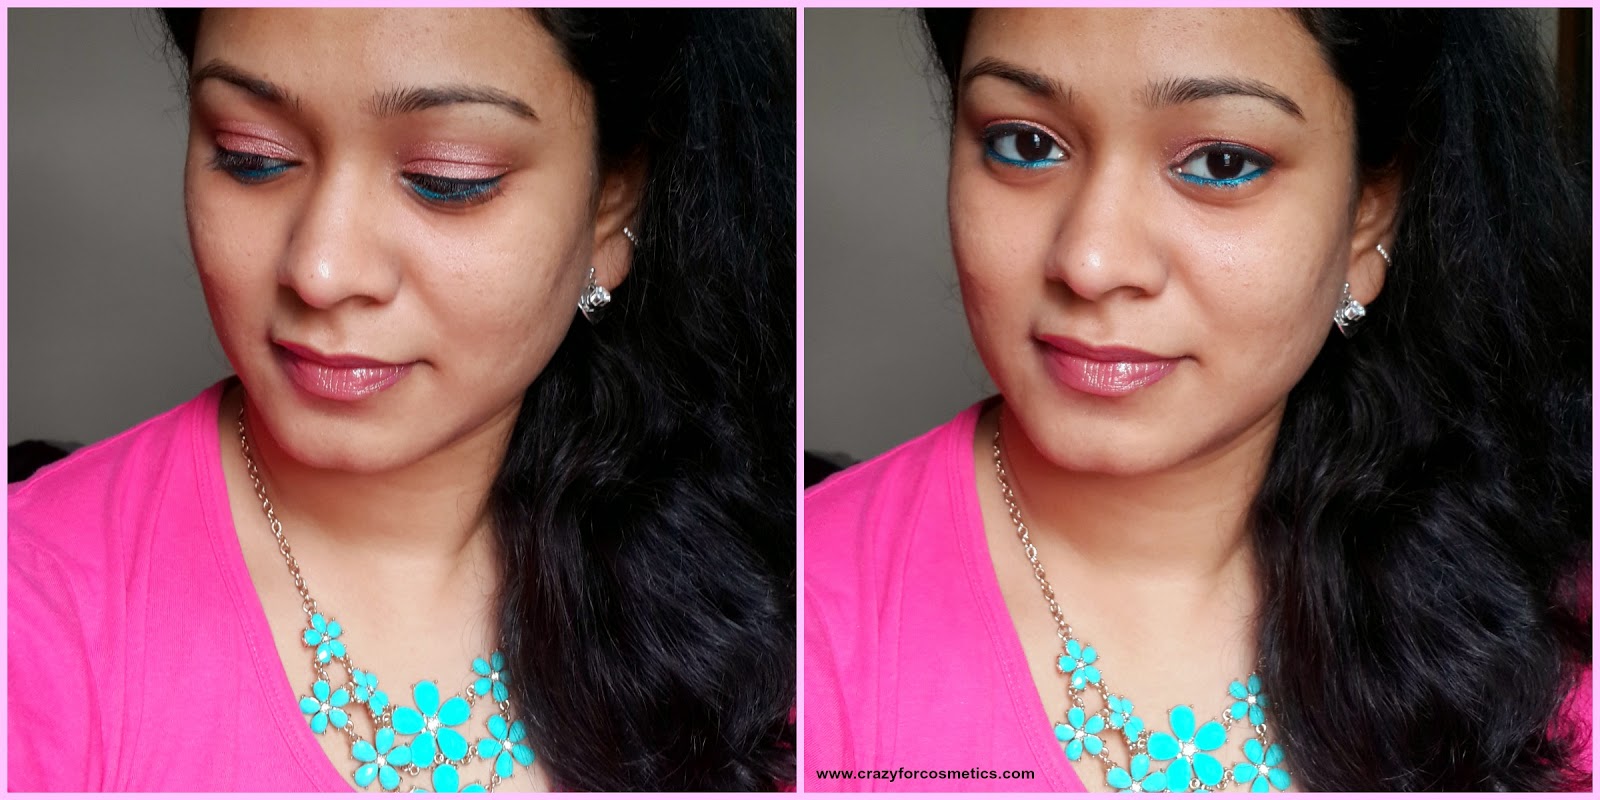 faces canada glam on mono eyeshadow in ruby quartz-faces canada glam on mono eyeshadow in ruby quartz review-faces canada glam on mono eyeshadow in ruby quartz swatches-faces canada glam on mono eyeshadow in ruby quartz India online-eyesadow for navrathri - festive makeup look